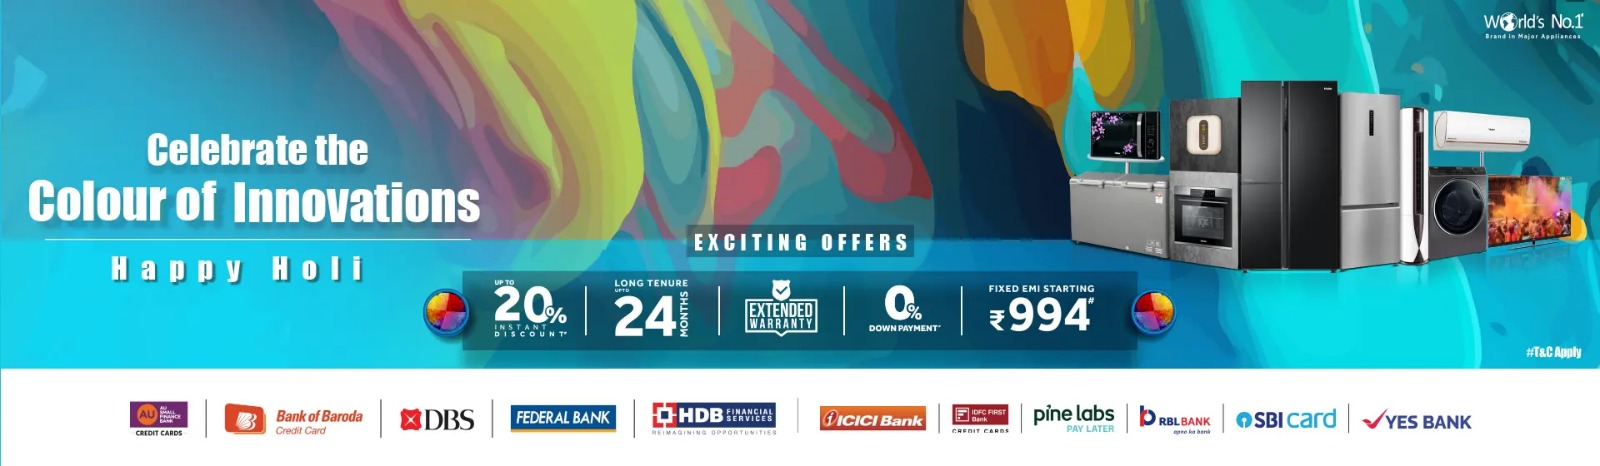 Haier India Announces Special Offers for Holi Festival